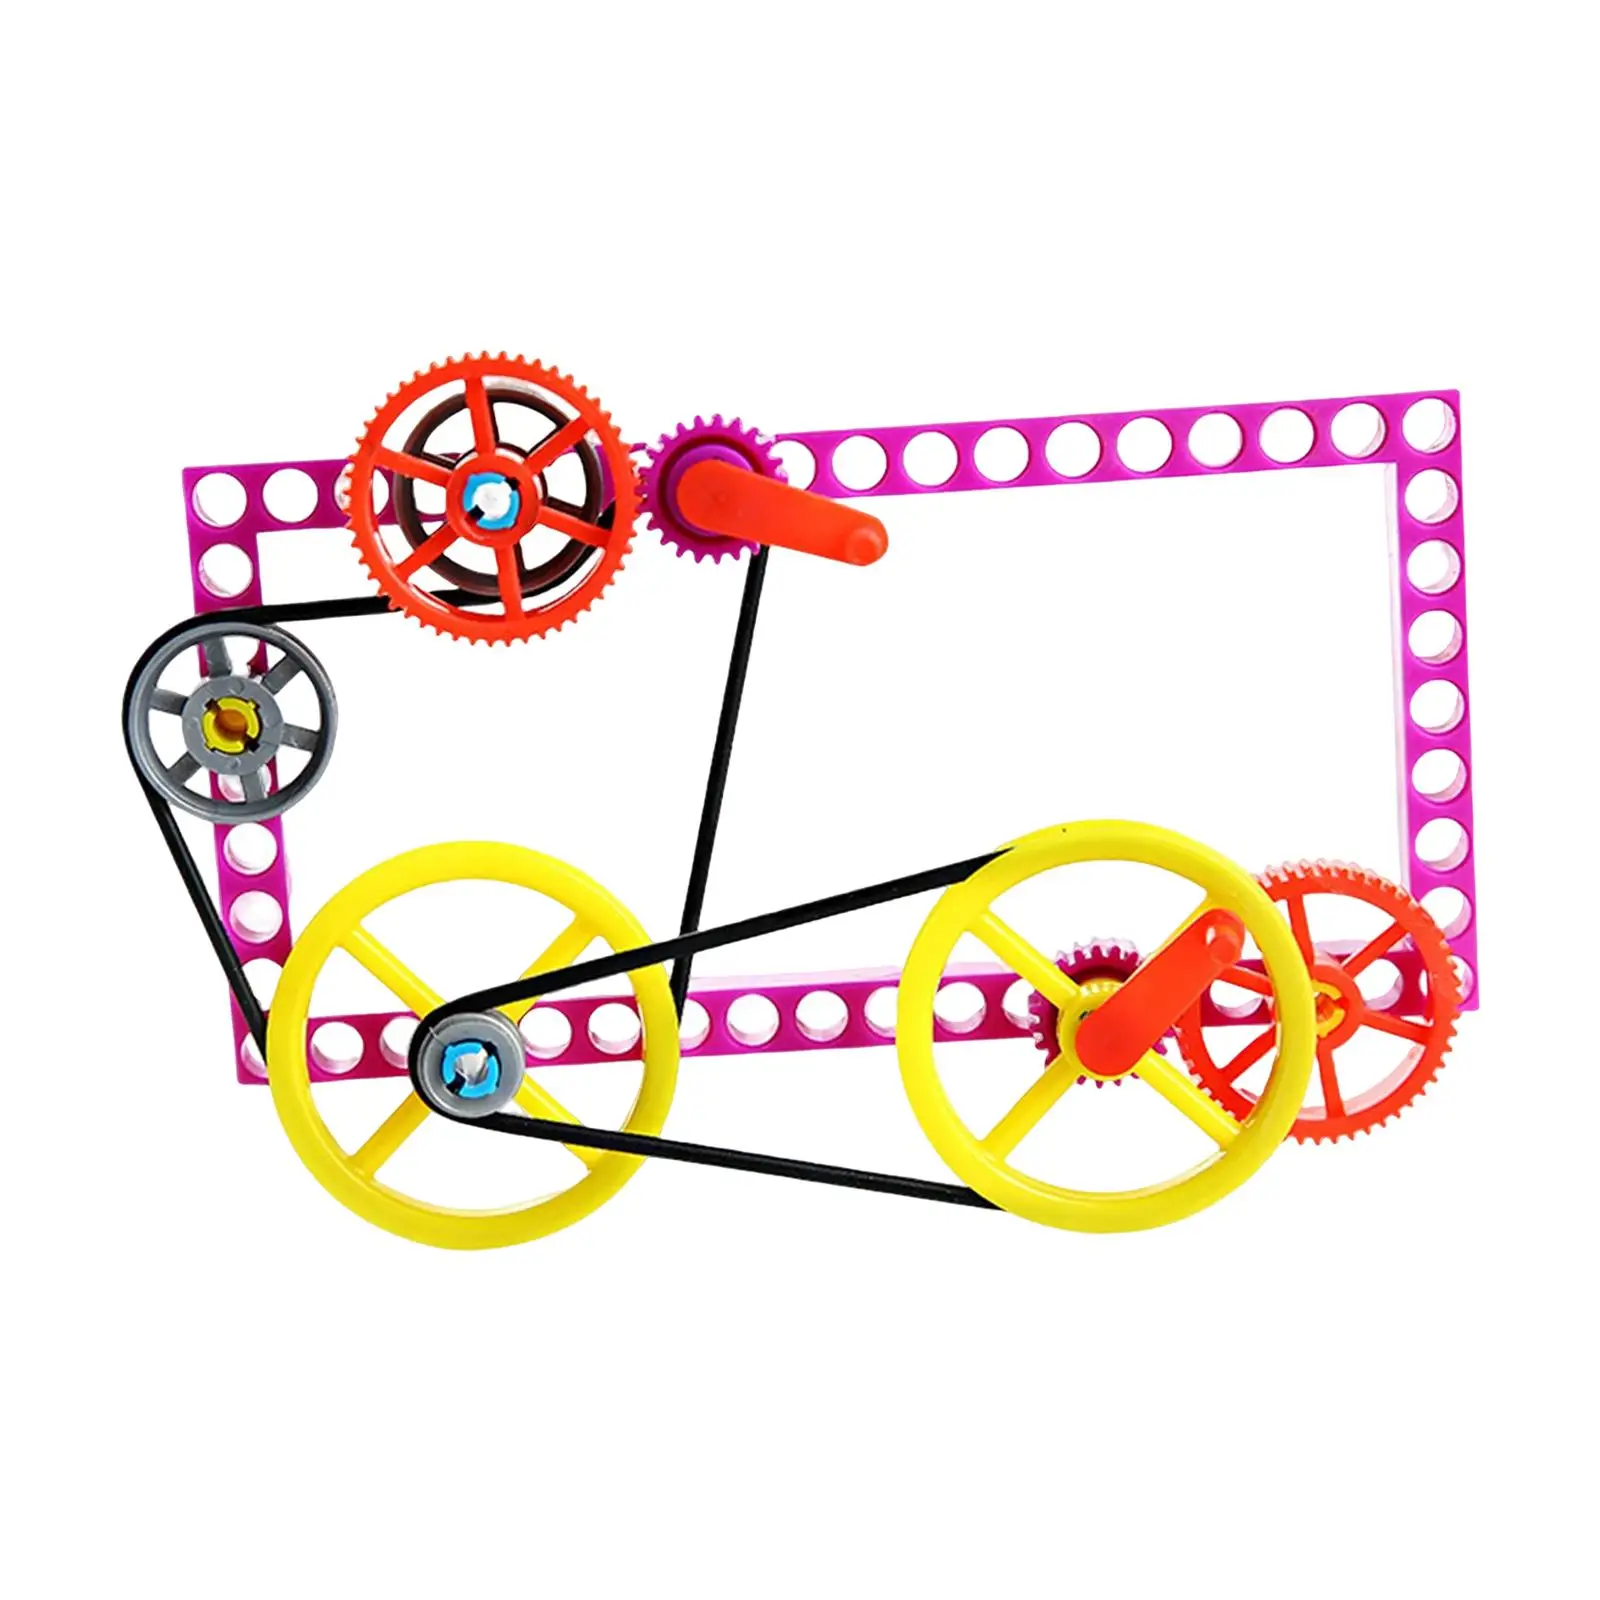 

Unfinished DIY Gear Pulley Toys Learning Educational Toy Science Experiment Project Kit DIY Model for Kids Girls Gifts